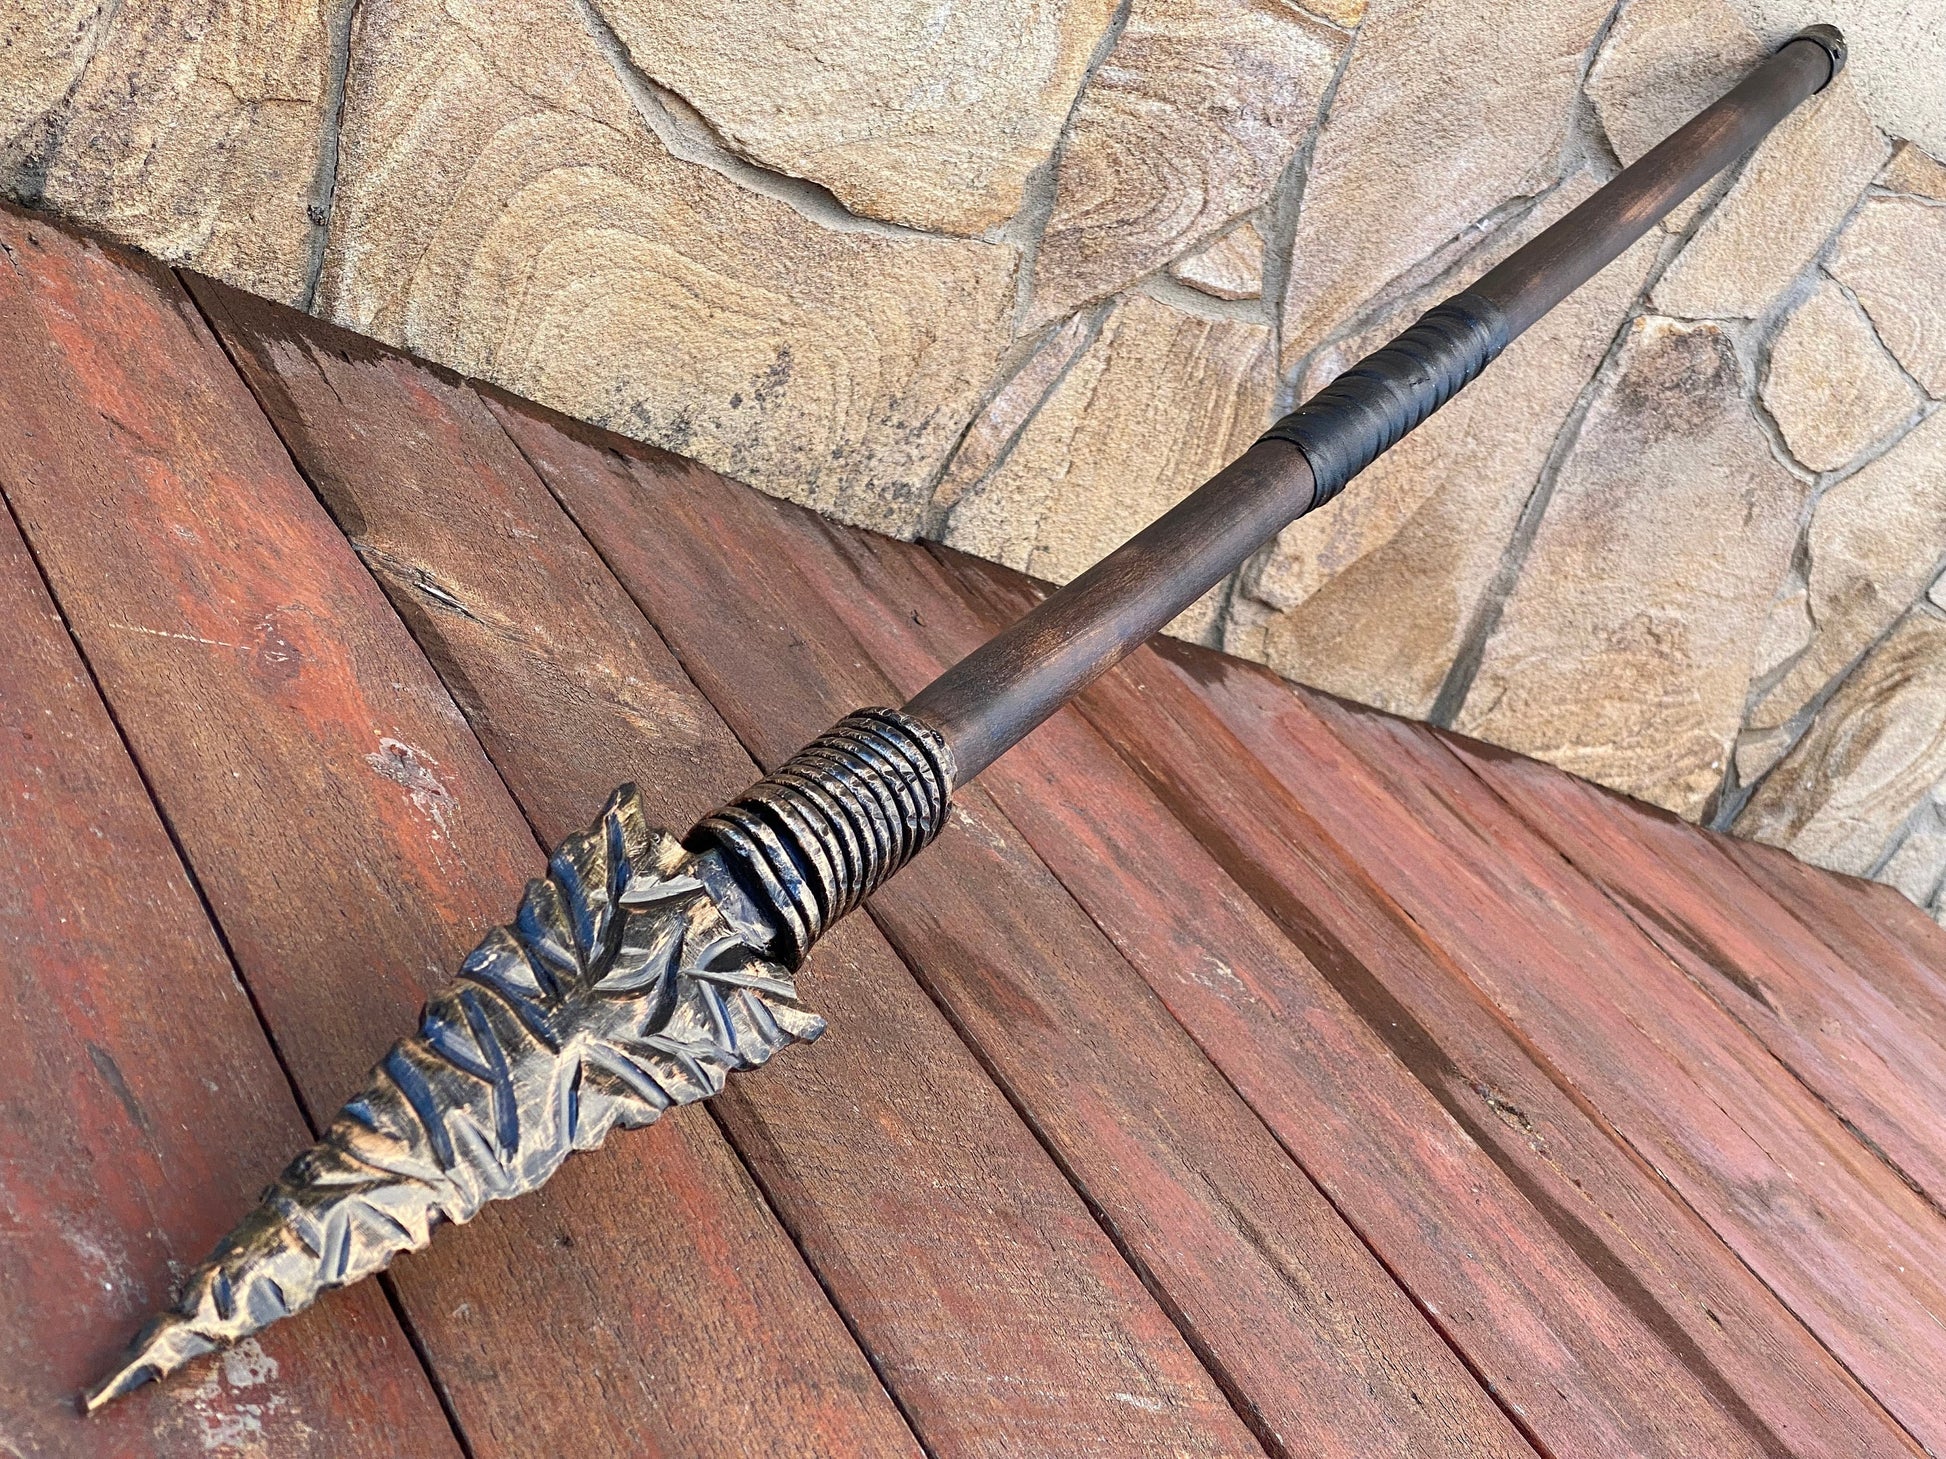 Spear, viking spear, artifact, medieval, birthday, castle, Middle Ages, Christmas, mens gift, steel gift, anniversary, personalized gift,axe